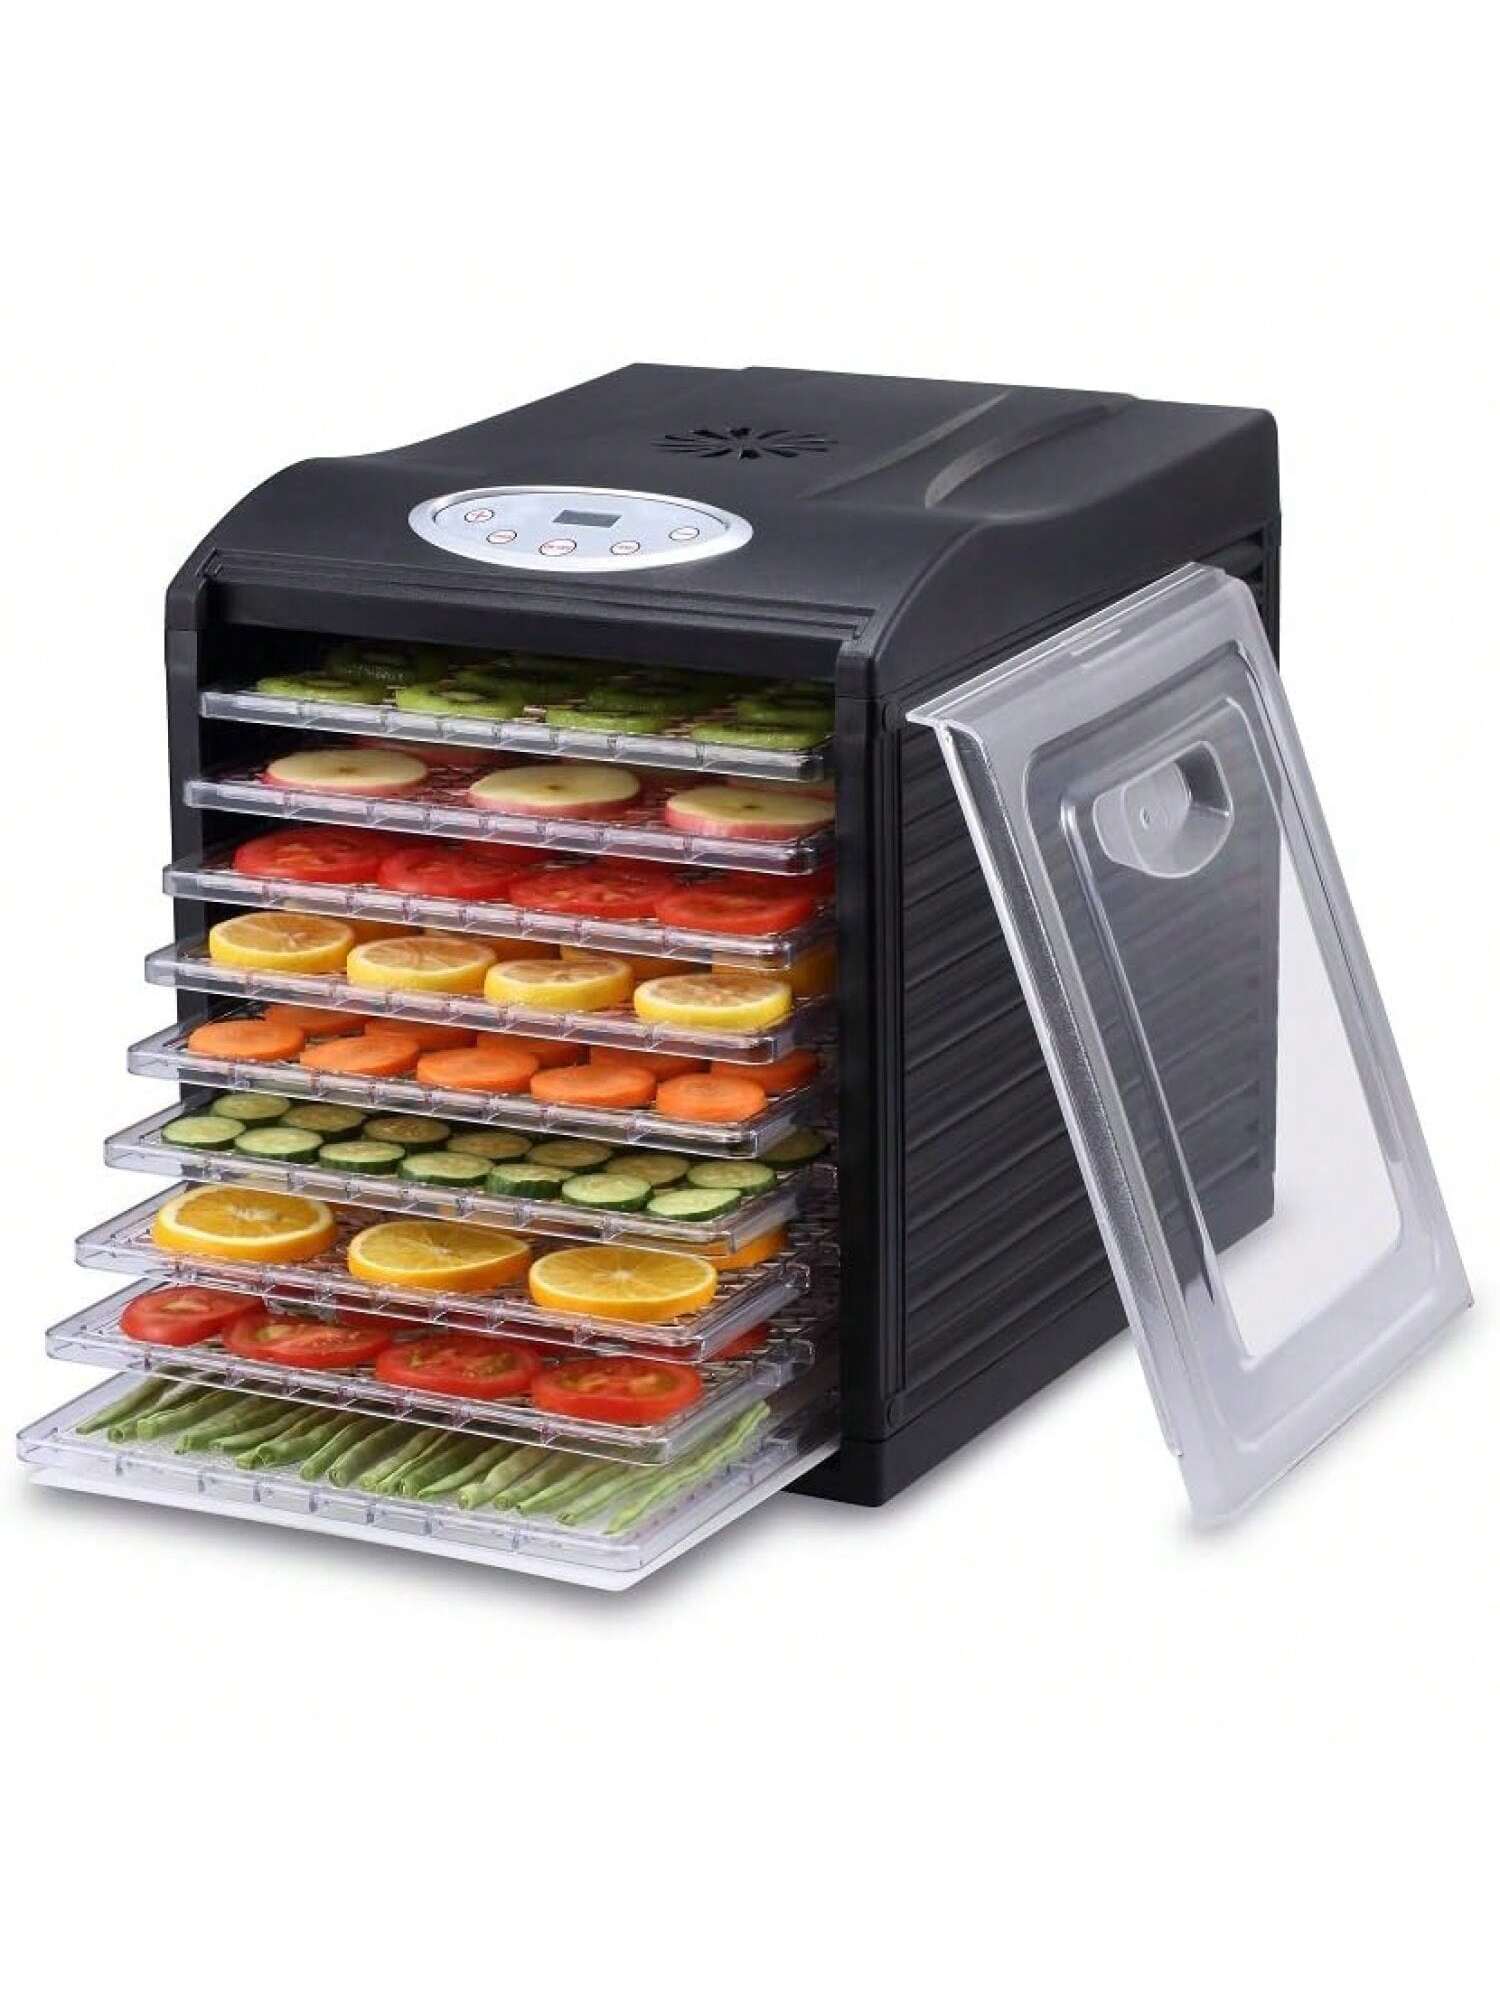 "Silent" 9 Tray Dehydrator with Digital Timer and Temperature Control for Fruit, Vegetables, Jerky, s, Dog Treats, Fruit Leathers and More-Multicolor-2